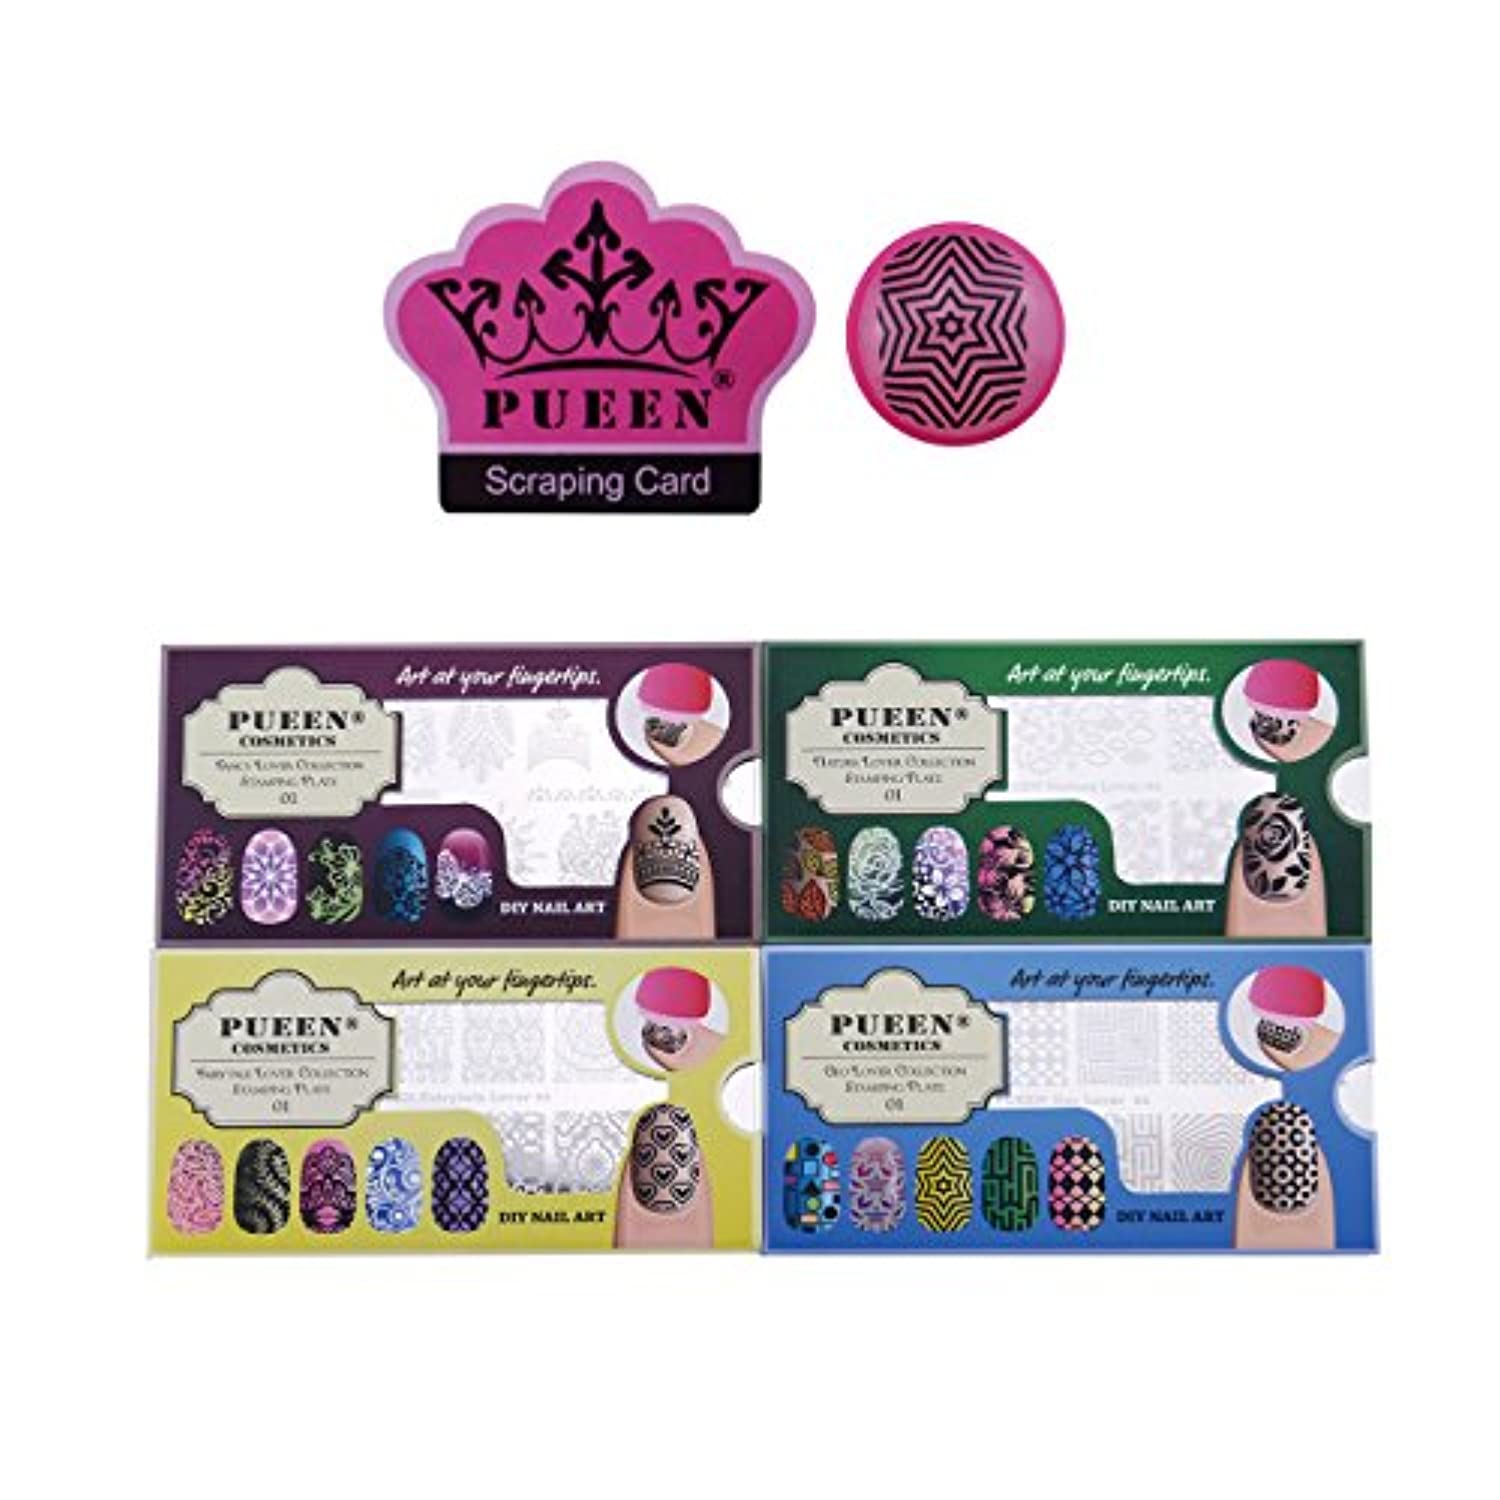 PUEEN Nail Art Stamping LOVE BOX I - 4 Lover Collection Plates - 125x65mm Unique Nailart Polish Stamping Manicure Image Plate Accessories Kit - BH000576